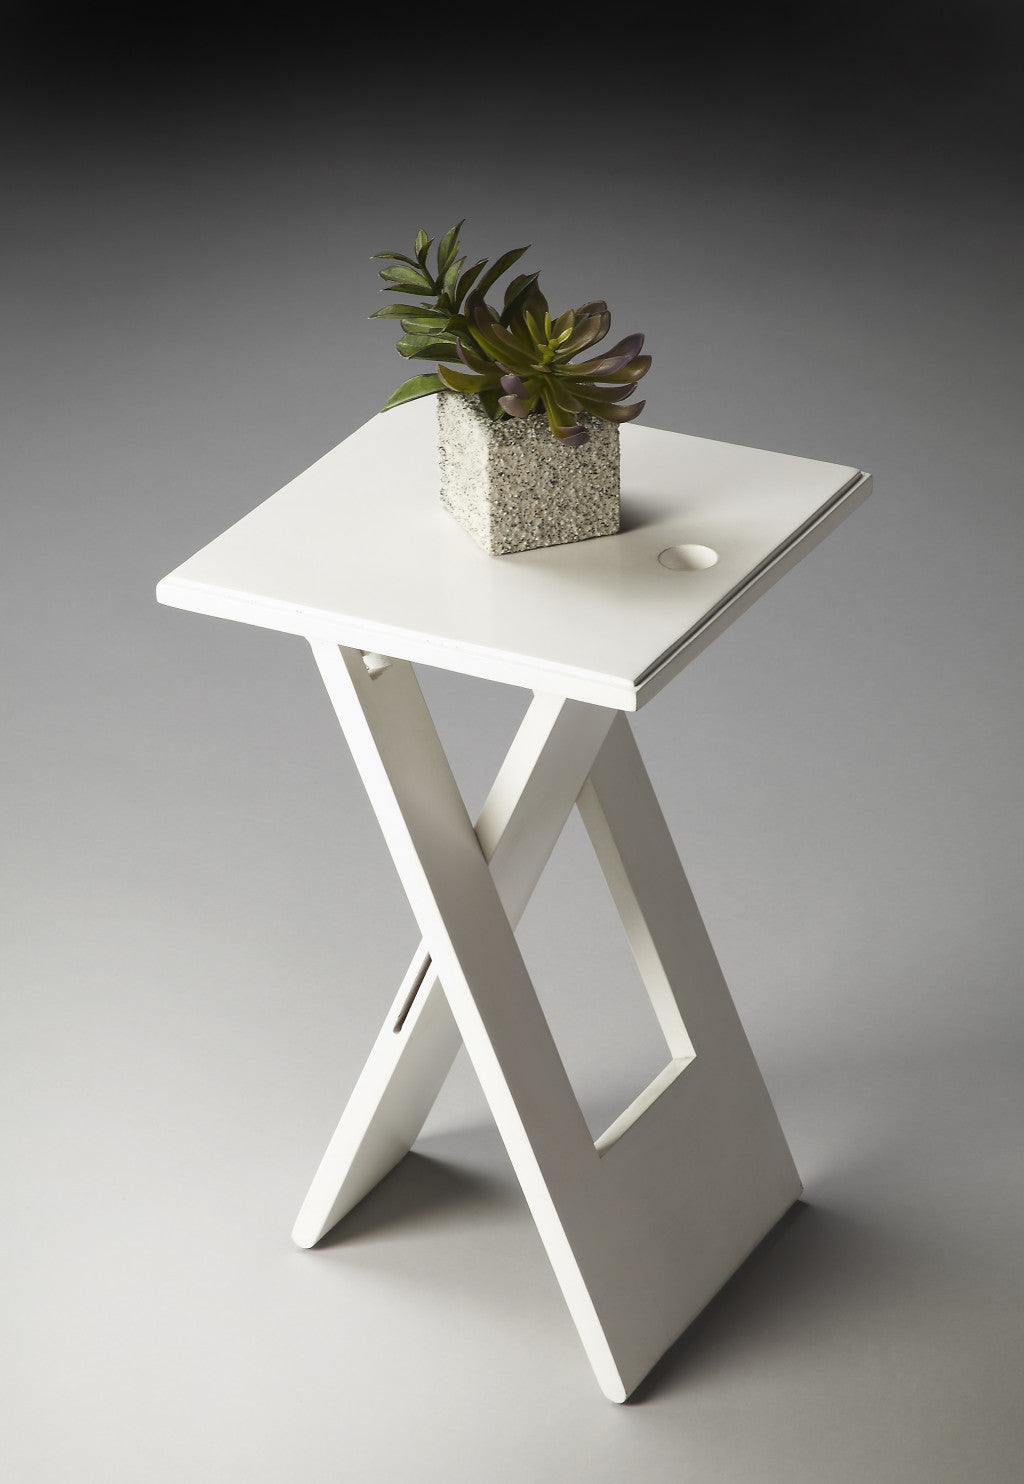 18" White Solid Wood Square Folding End Table